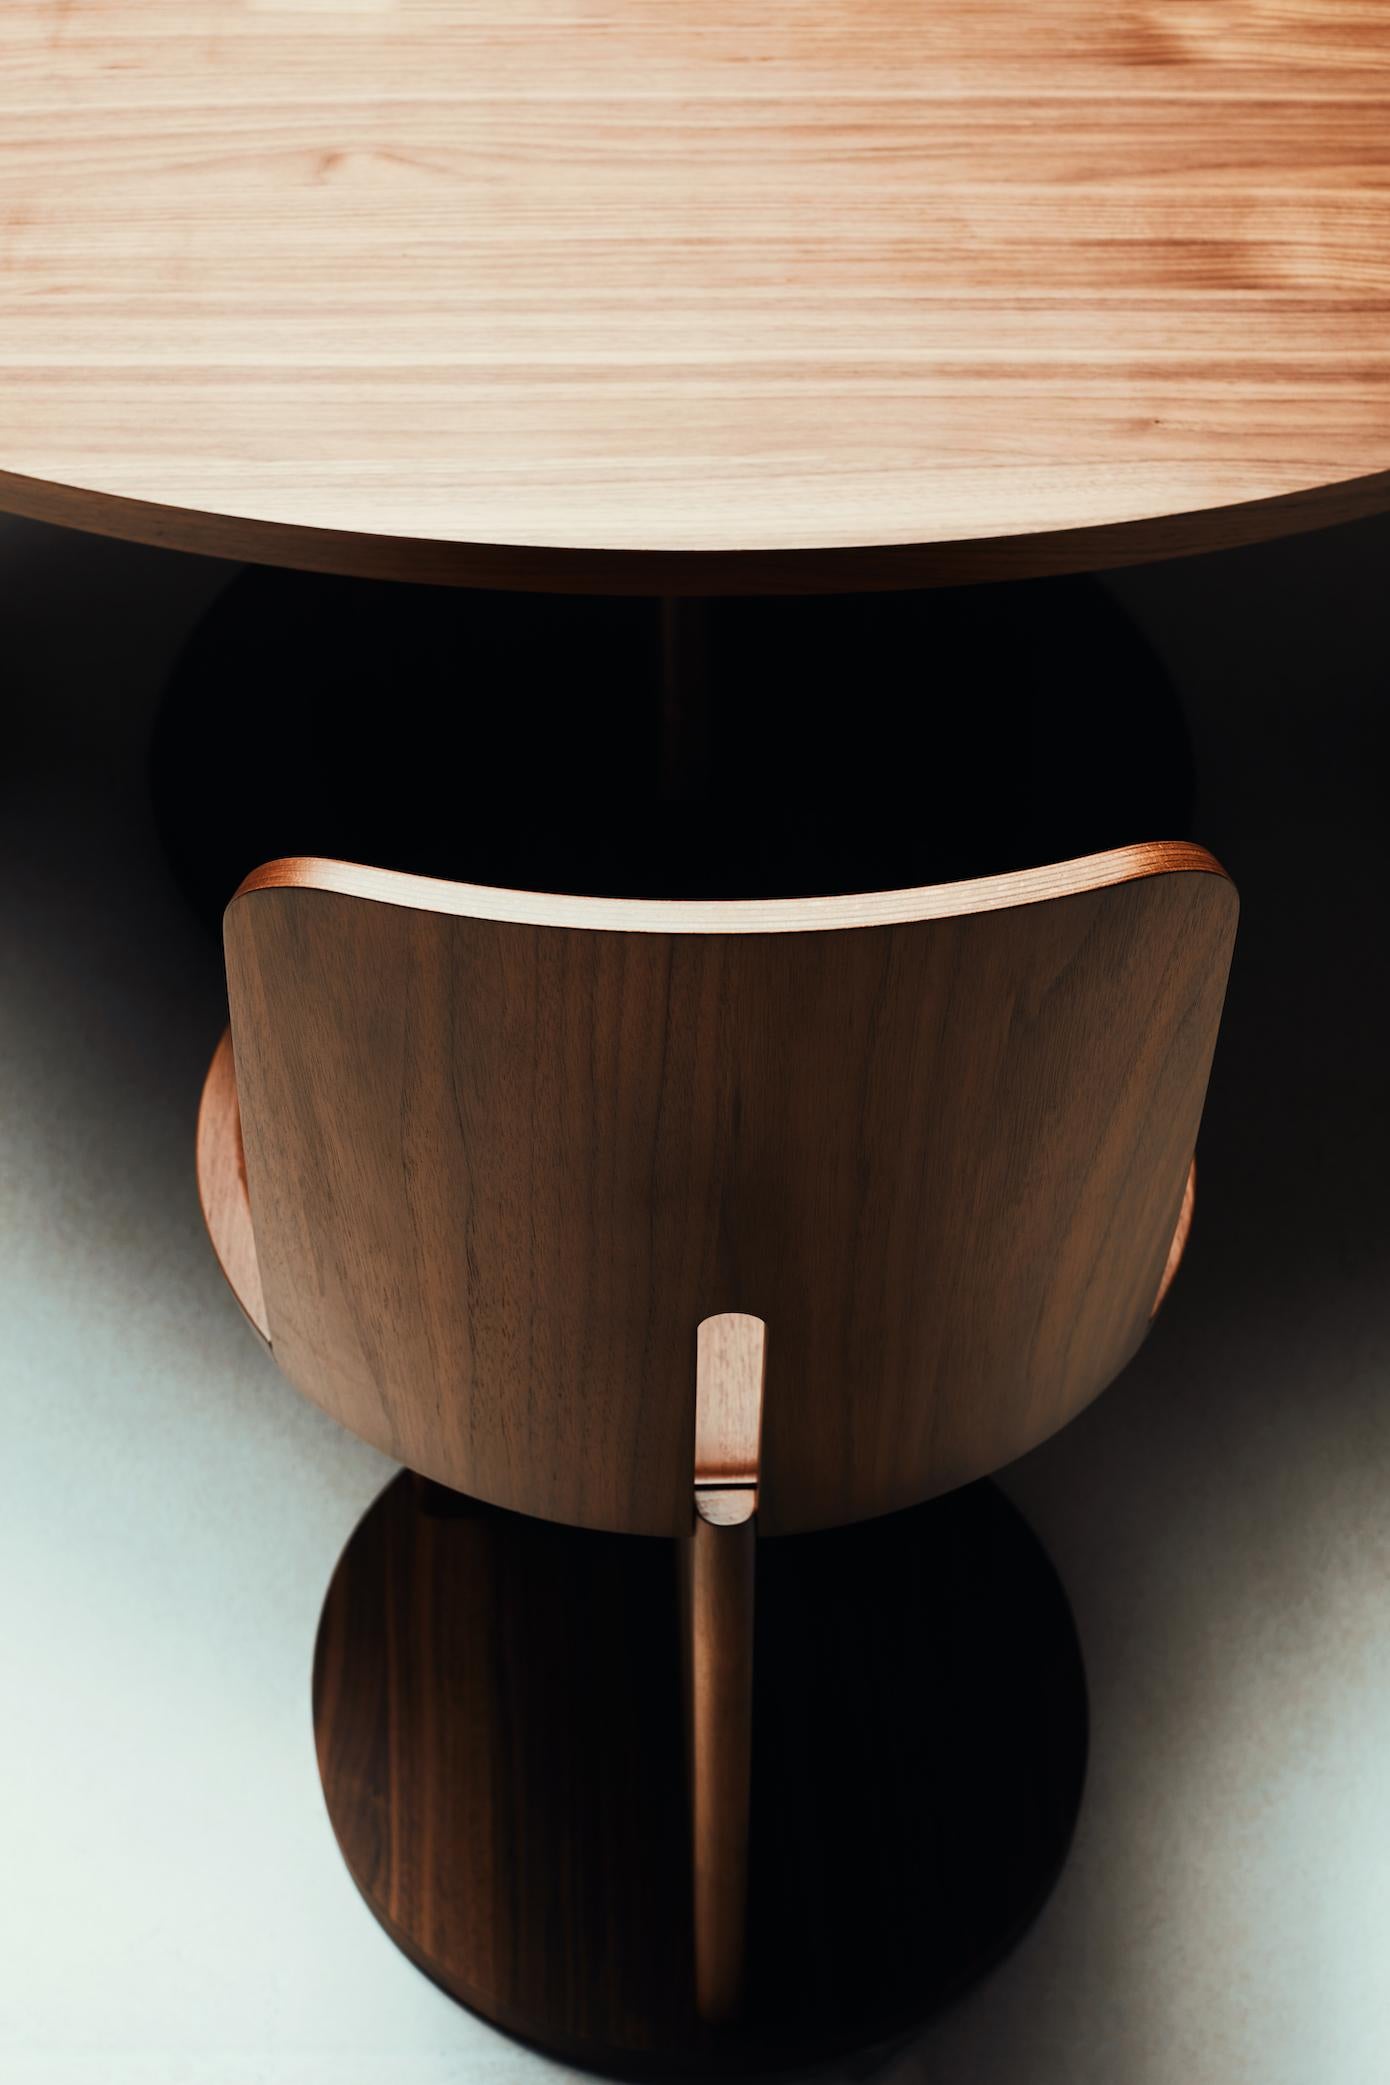 La Manufacture-Paris Intersection Canaletto Walnut Chair Designed by Neri & Hu For Sale 4